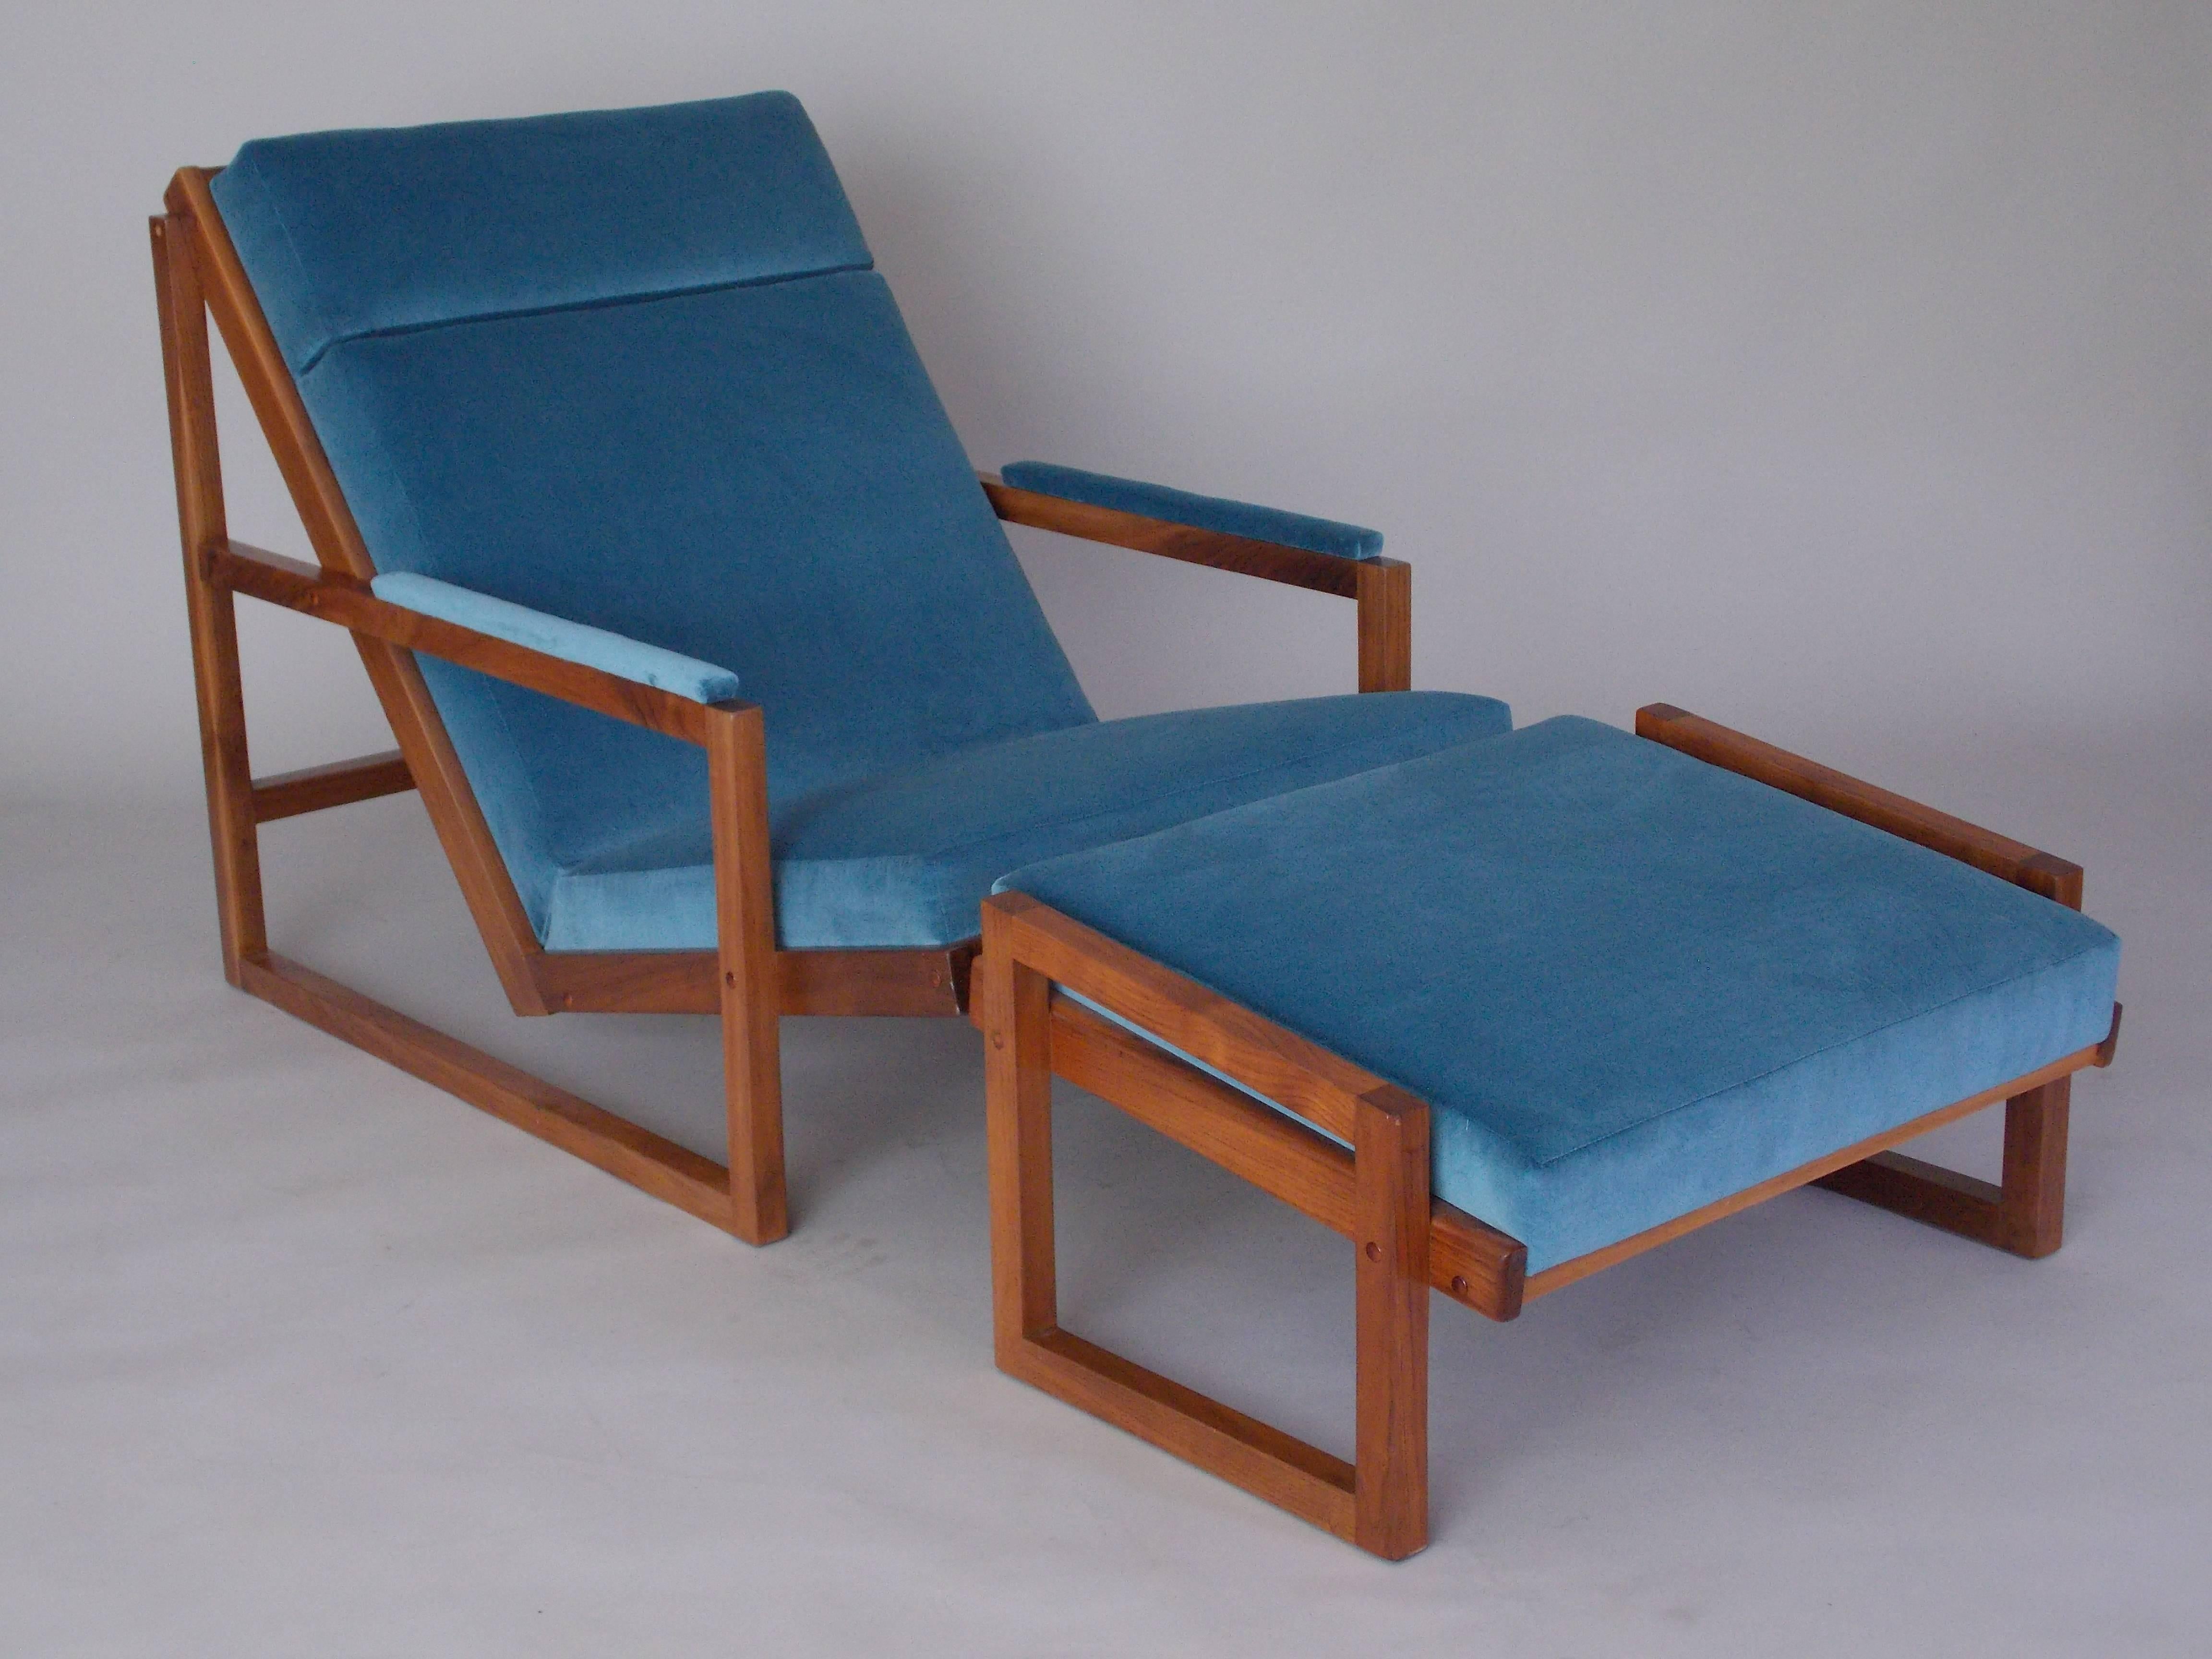 This is a rare and early design example of the Cruisin lounge chair made in solid walnut wood construction. They were later made in bronze and or steel.
It has been restored with an elegant light blue velvet upholstery.
Mr. Baughmans' designs are